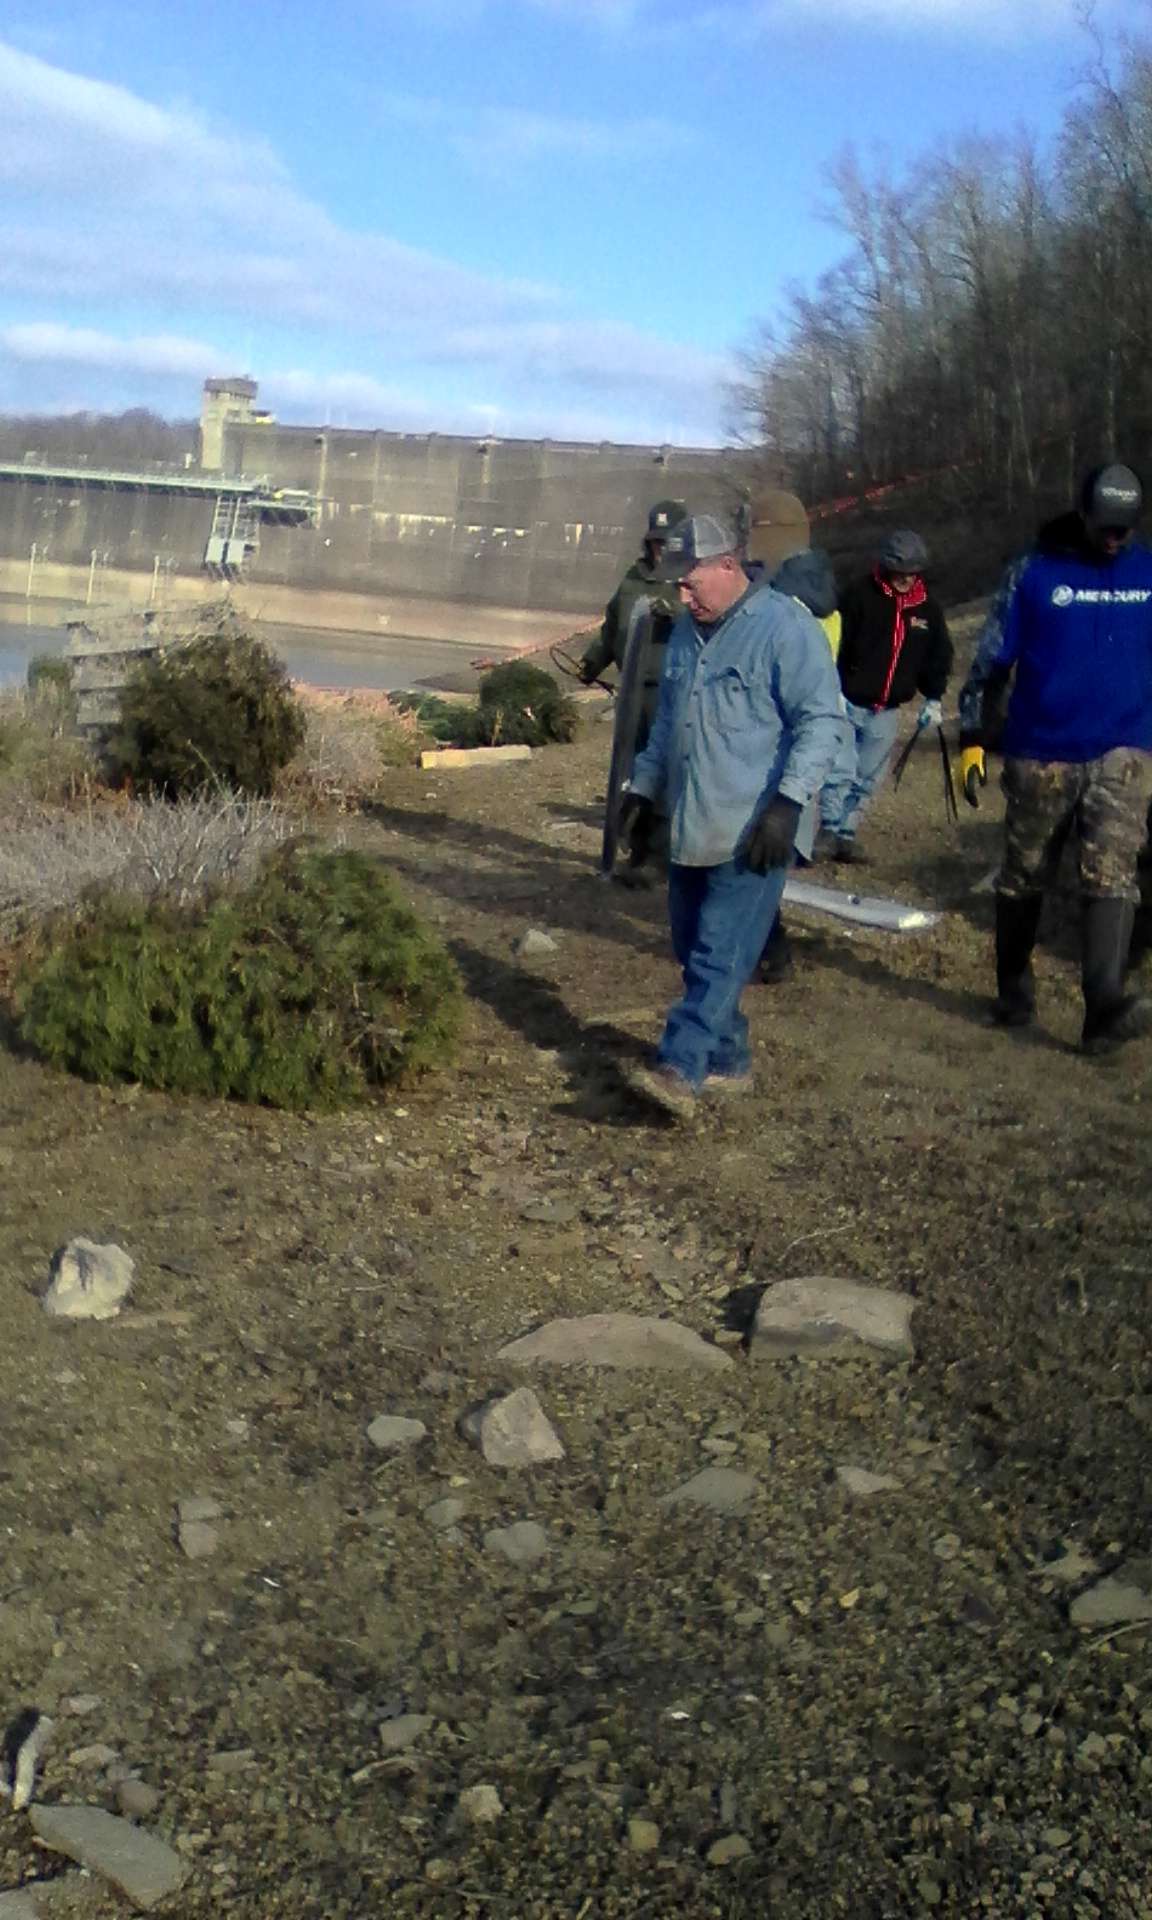 According to Jerod Harman, West Virginia conservation director, B.A.S.S. Nation of West Virginia volunteers assisted the U.S. Army Corps of Engineers at Tygart Lake near Grafton, W.V., on Saturday, Feb. 16, 2019.
